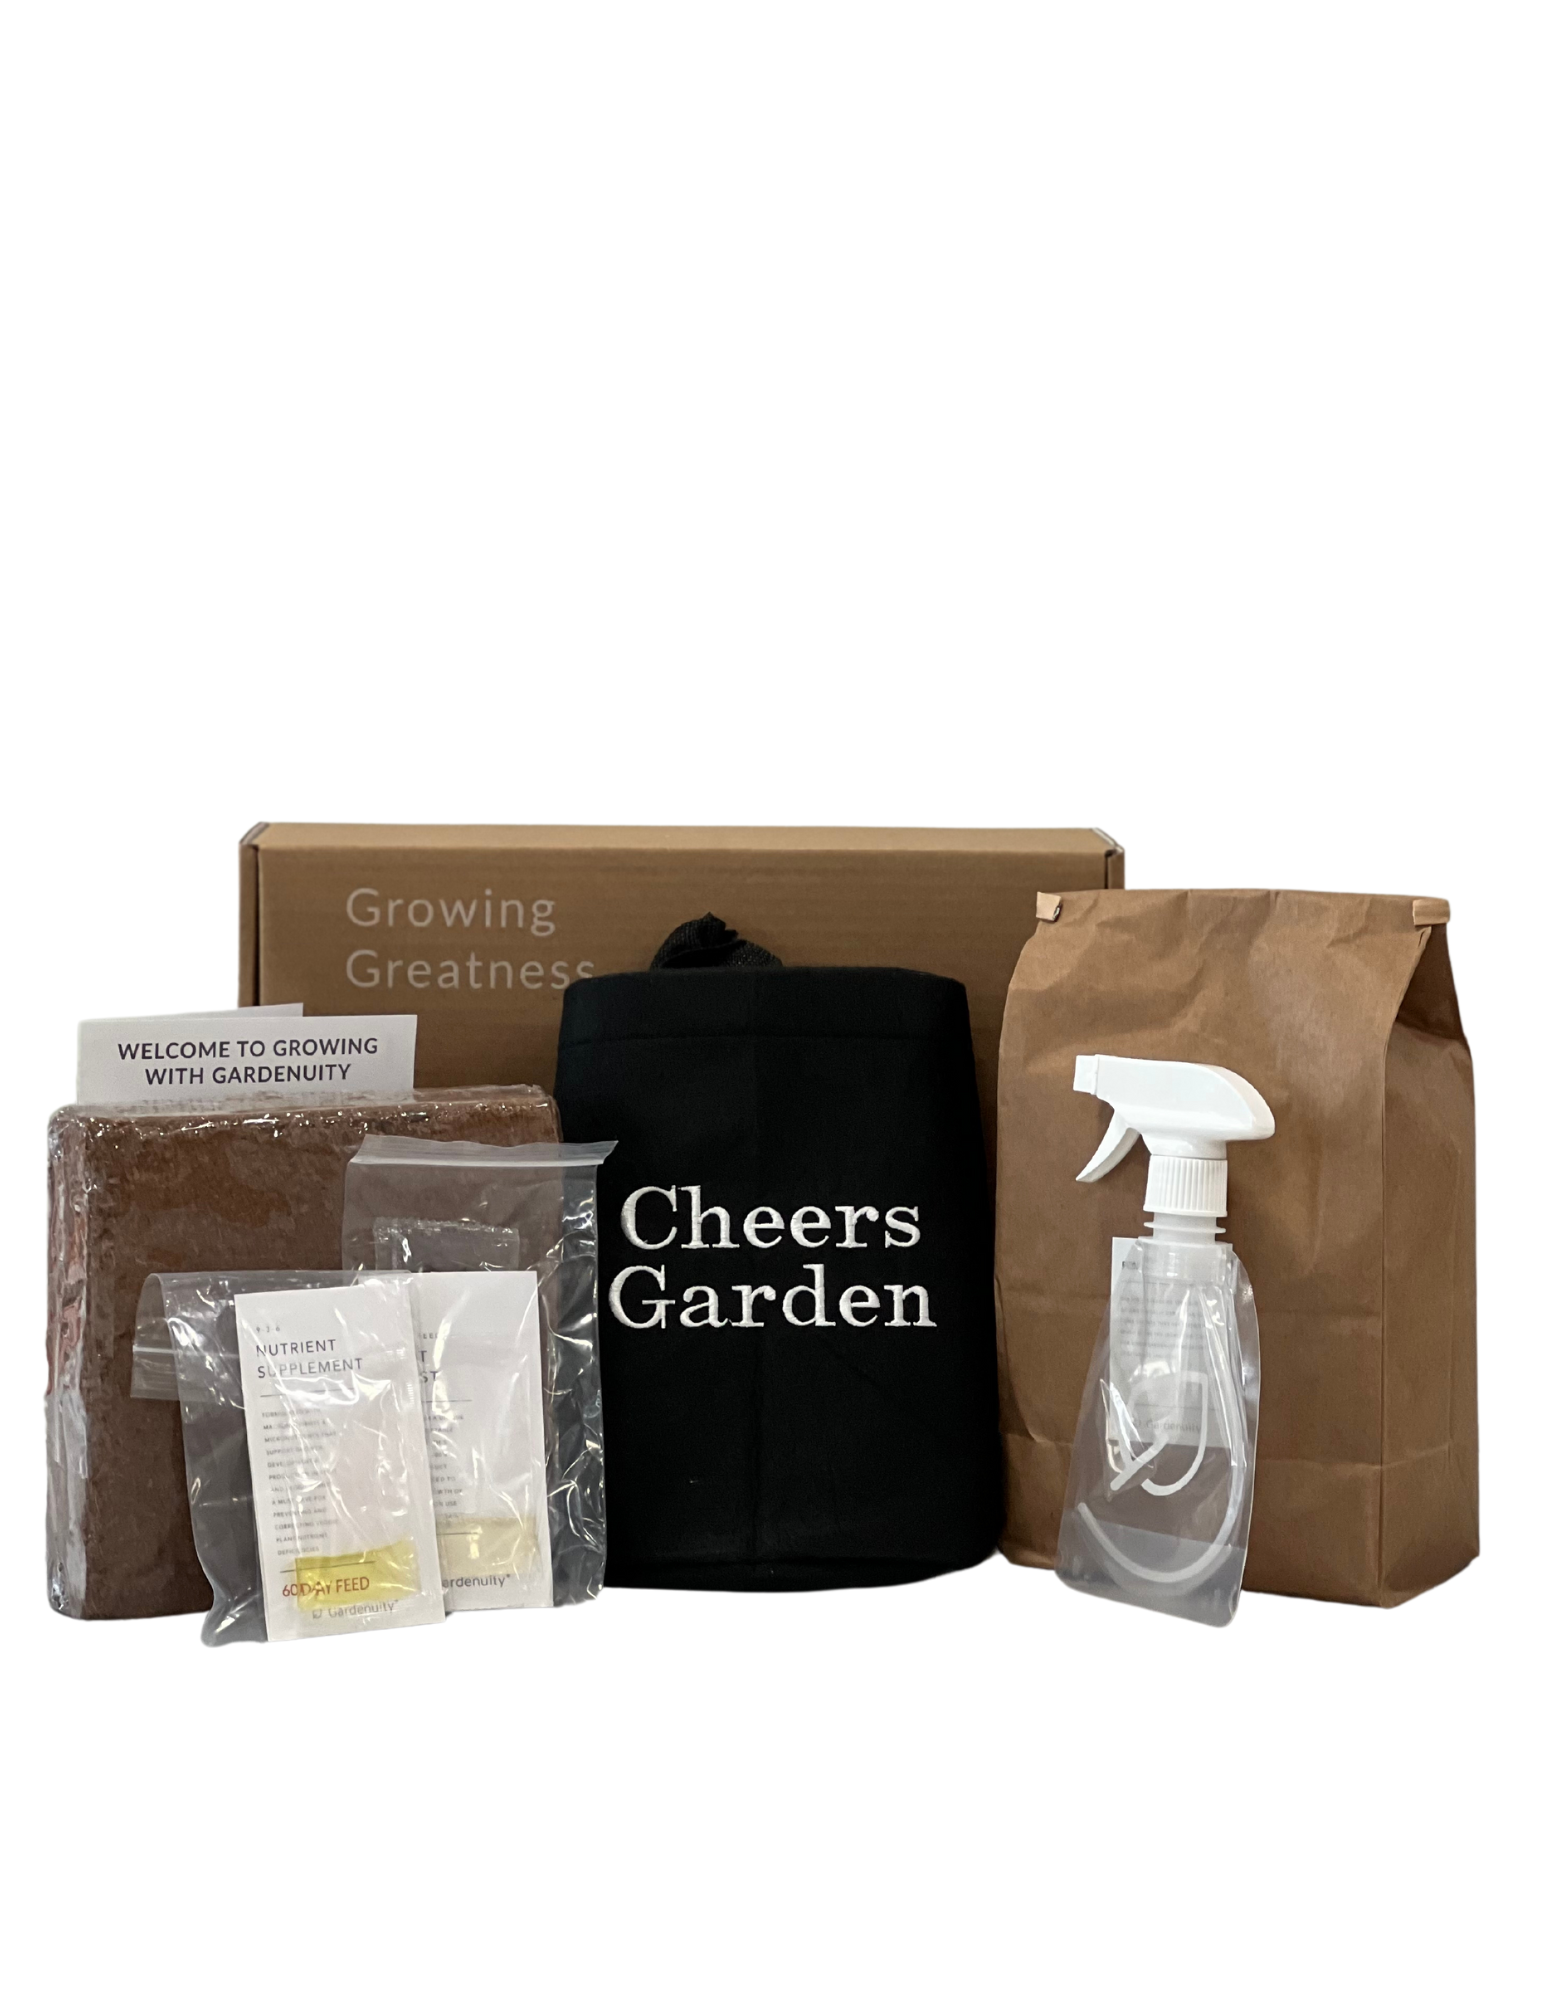 Outdoor Cheers Giftable with Cocktail Garden Salt Gift Set by Gardenuity